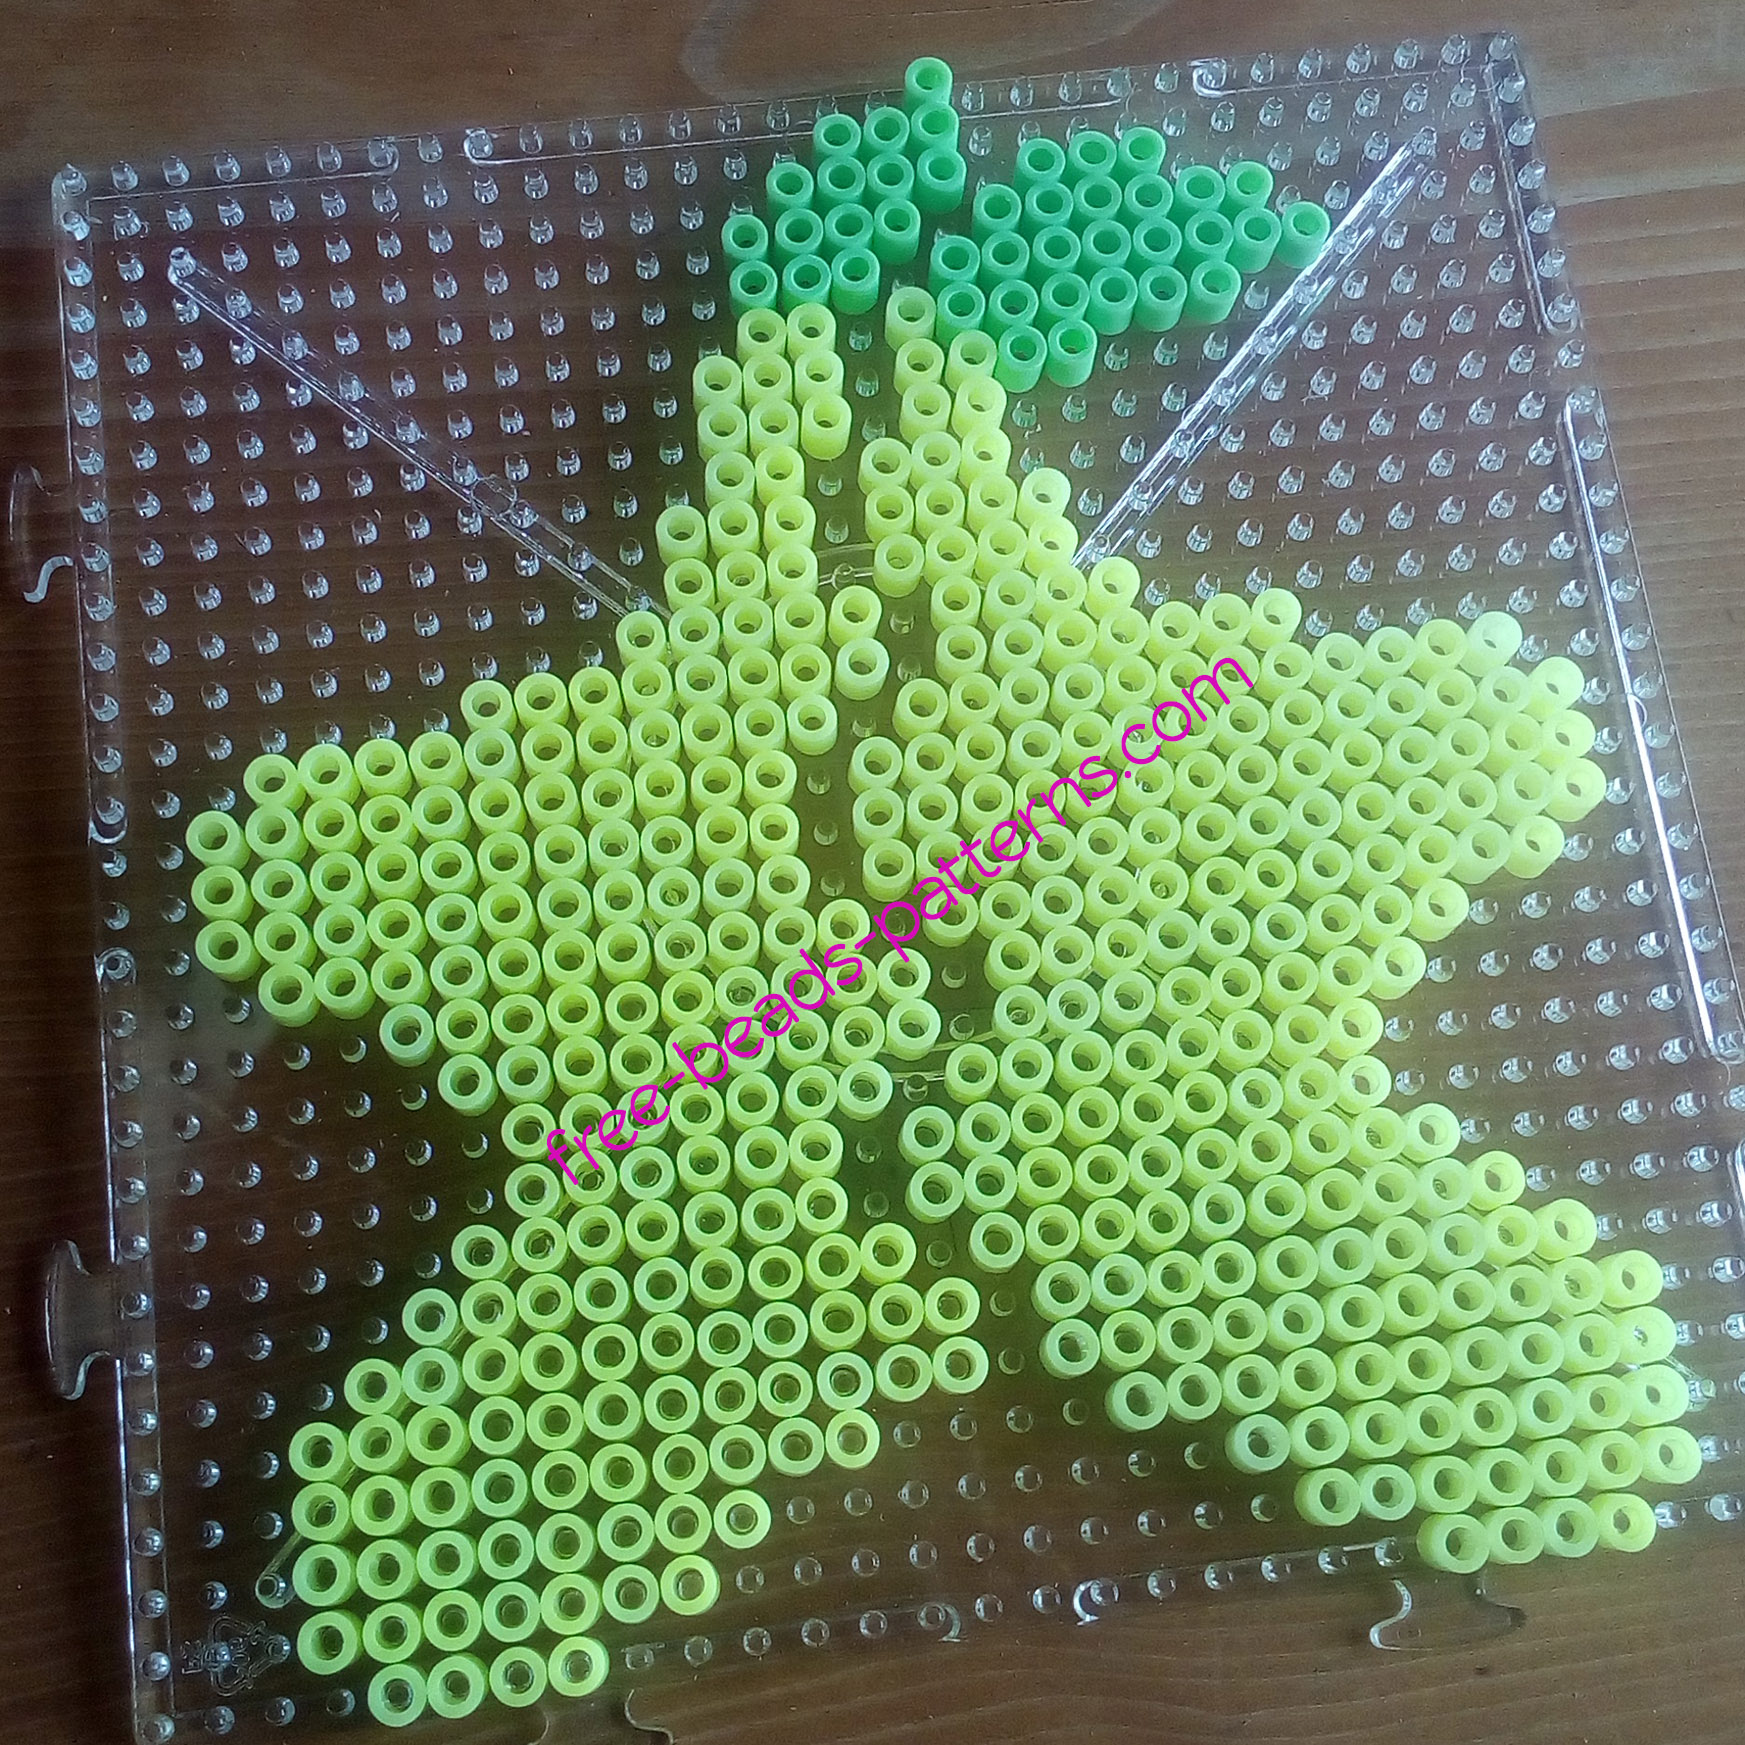 Iron beads two parts of Kingdom Hearts Paopu fruit by Bill (1)